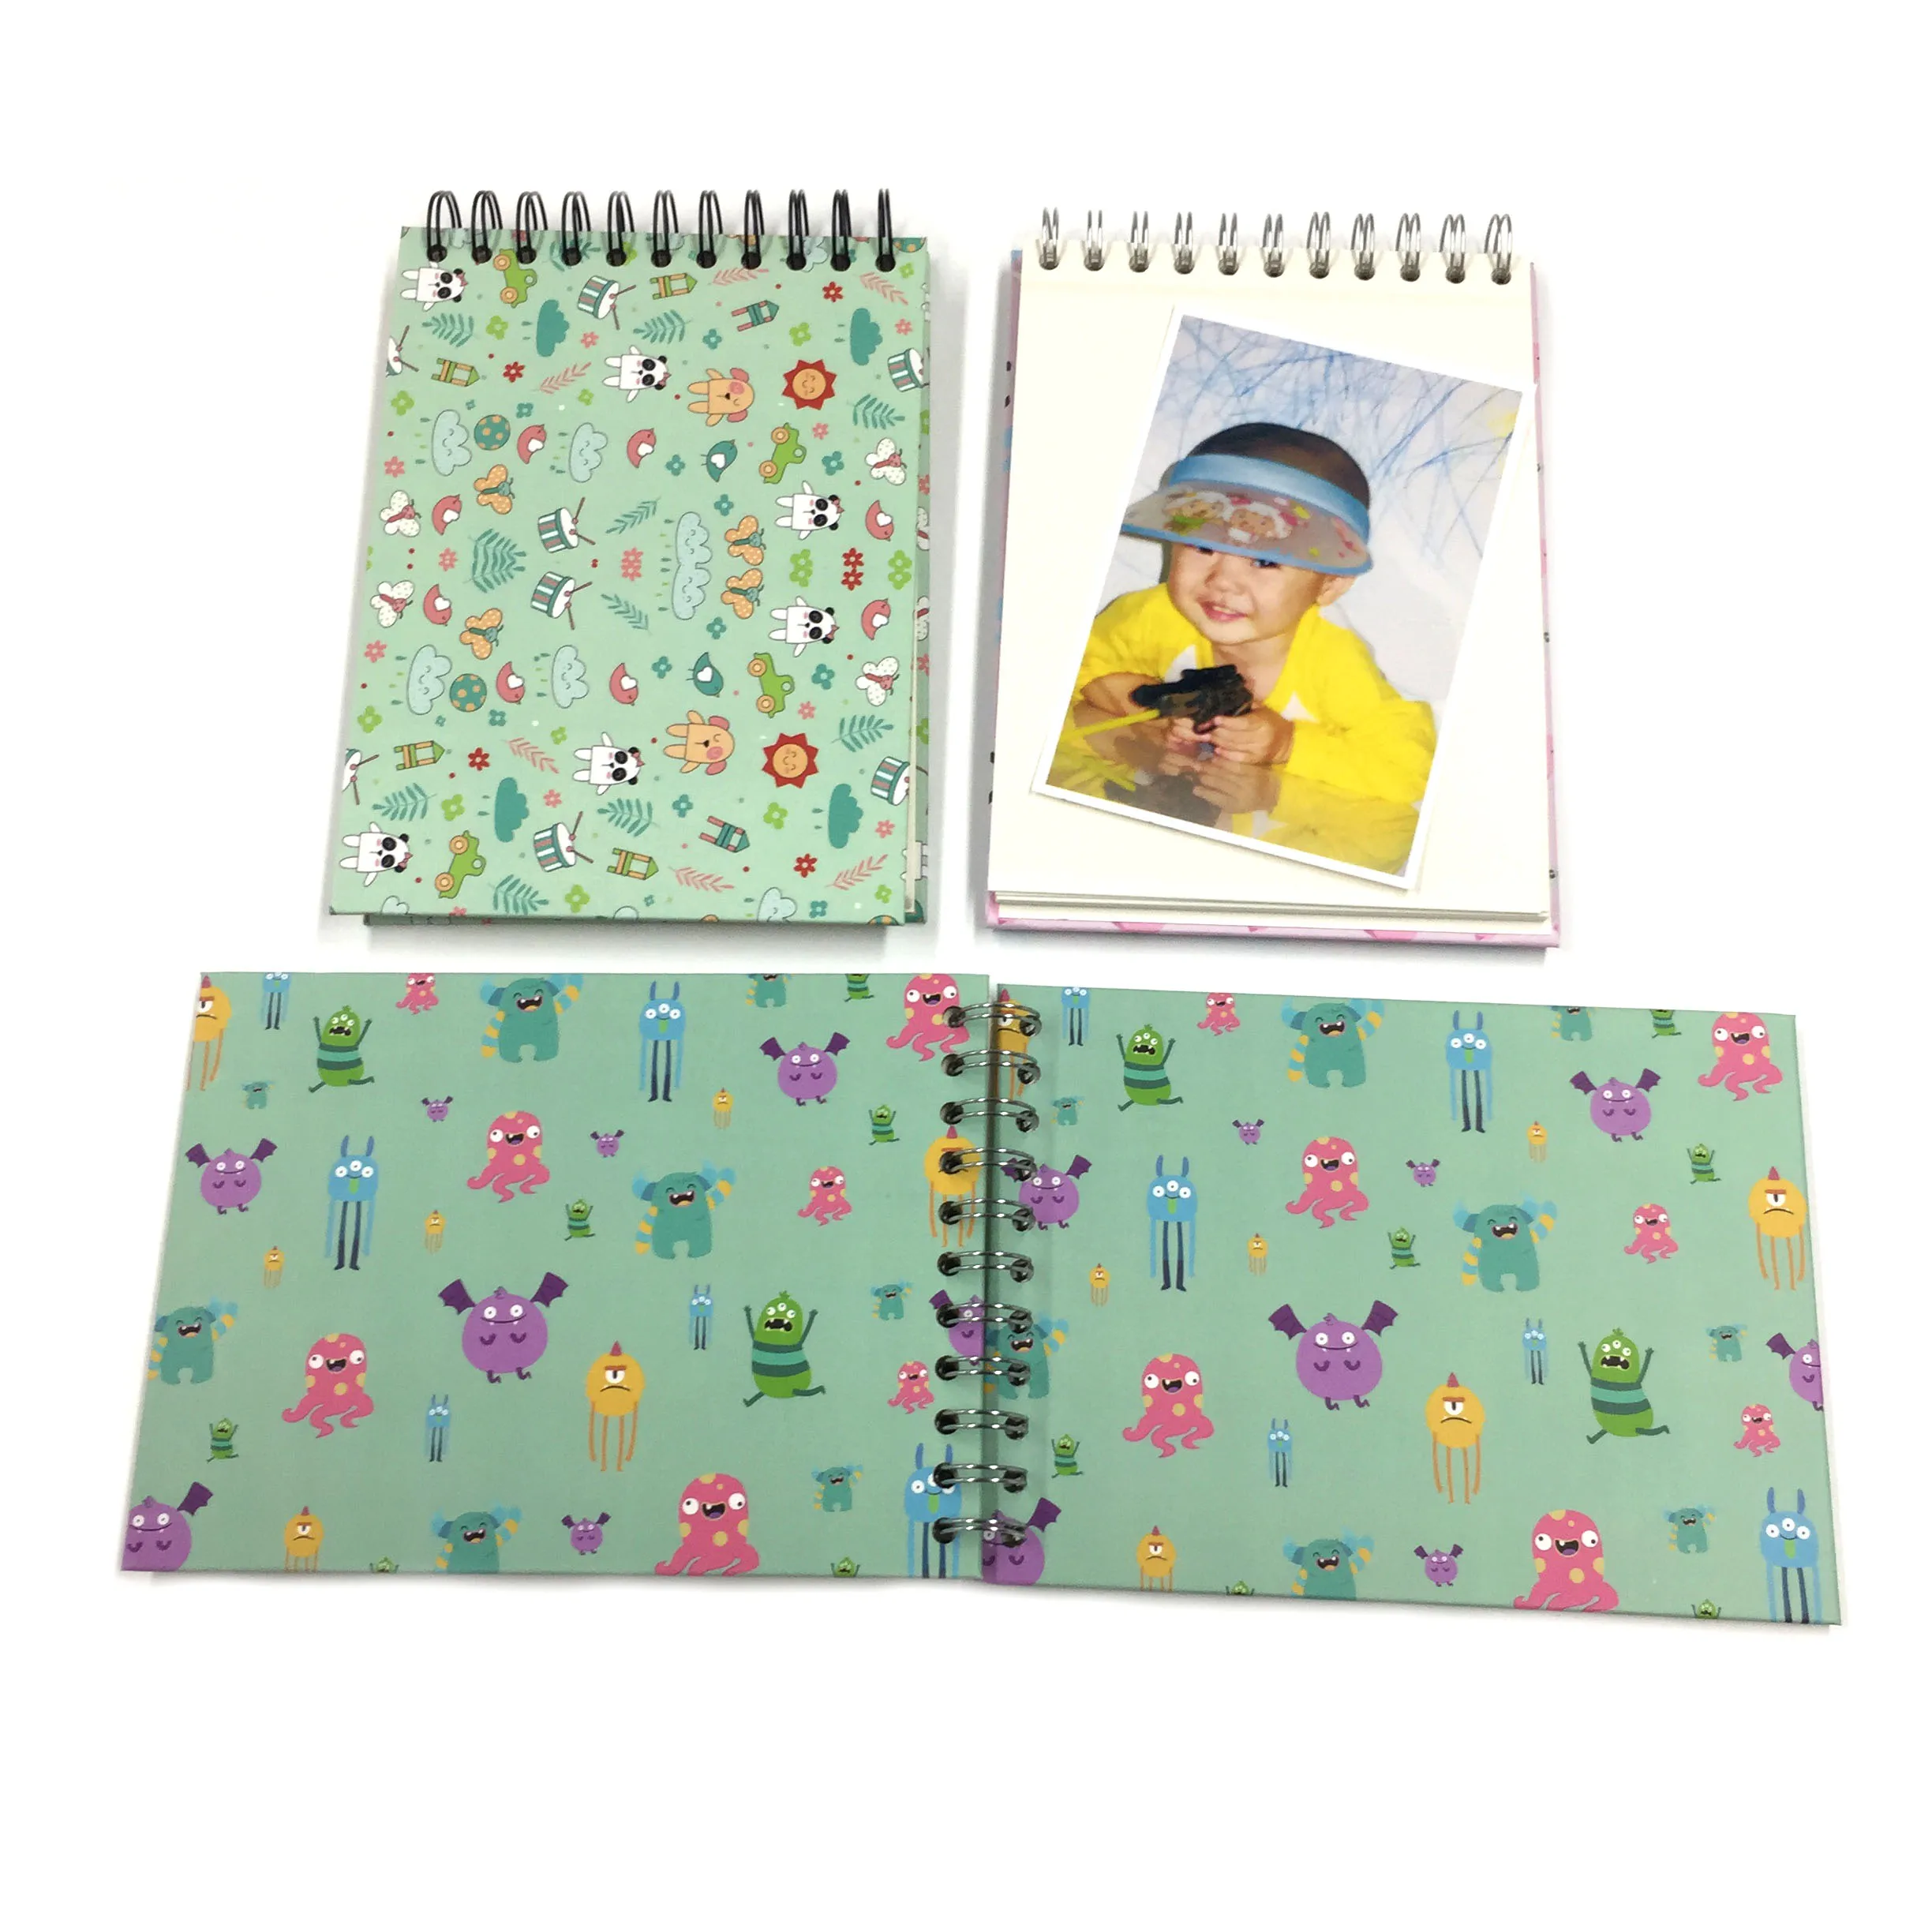 Cute Animal Theme Spiral Bound 10 Sheets Baby Self Stick Photo Album For 4x6 Photo